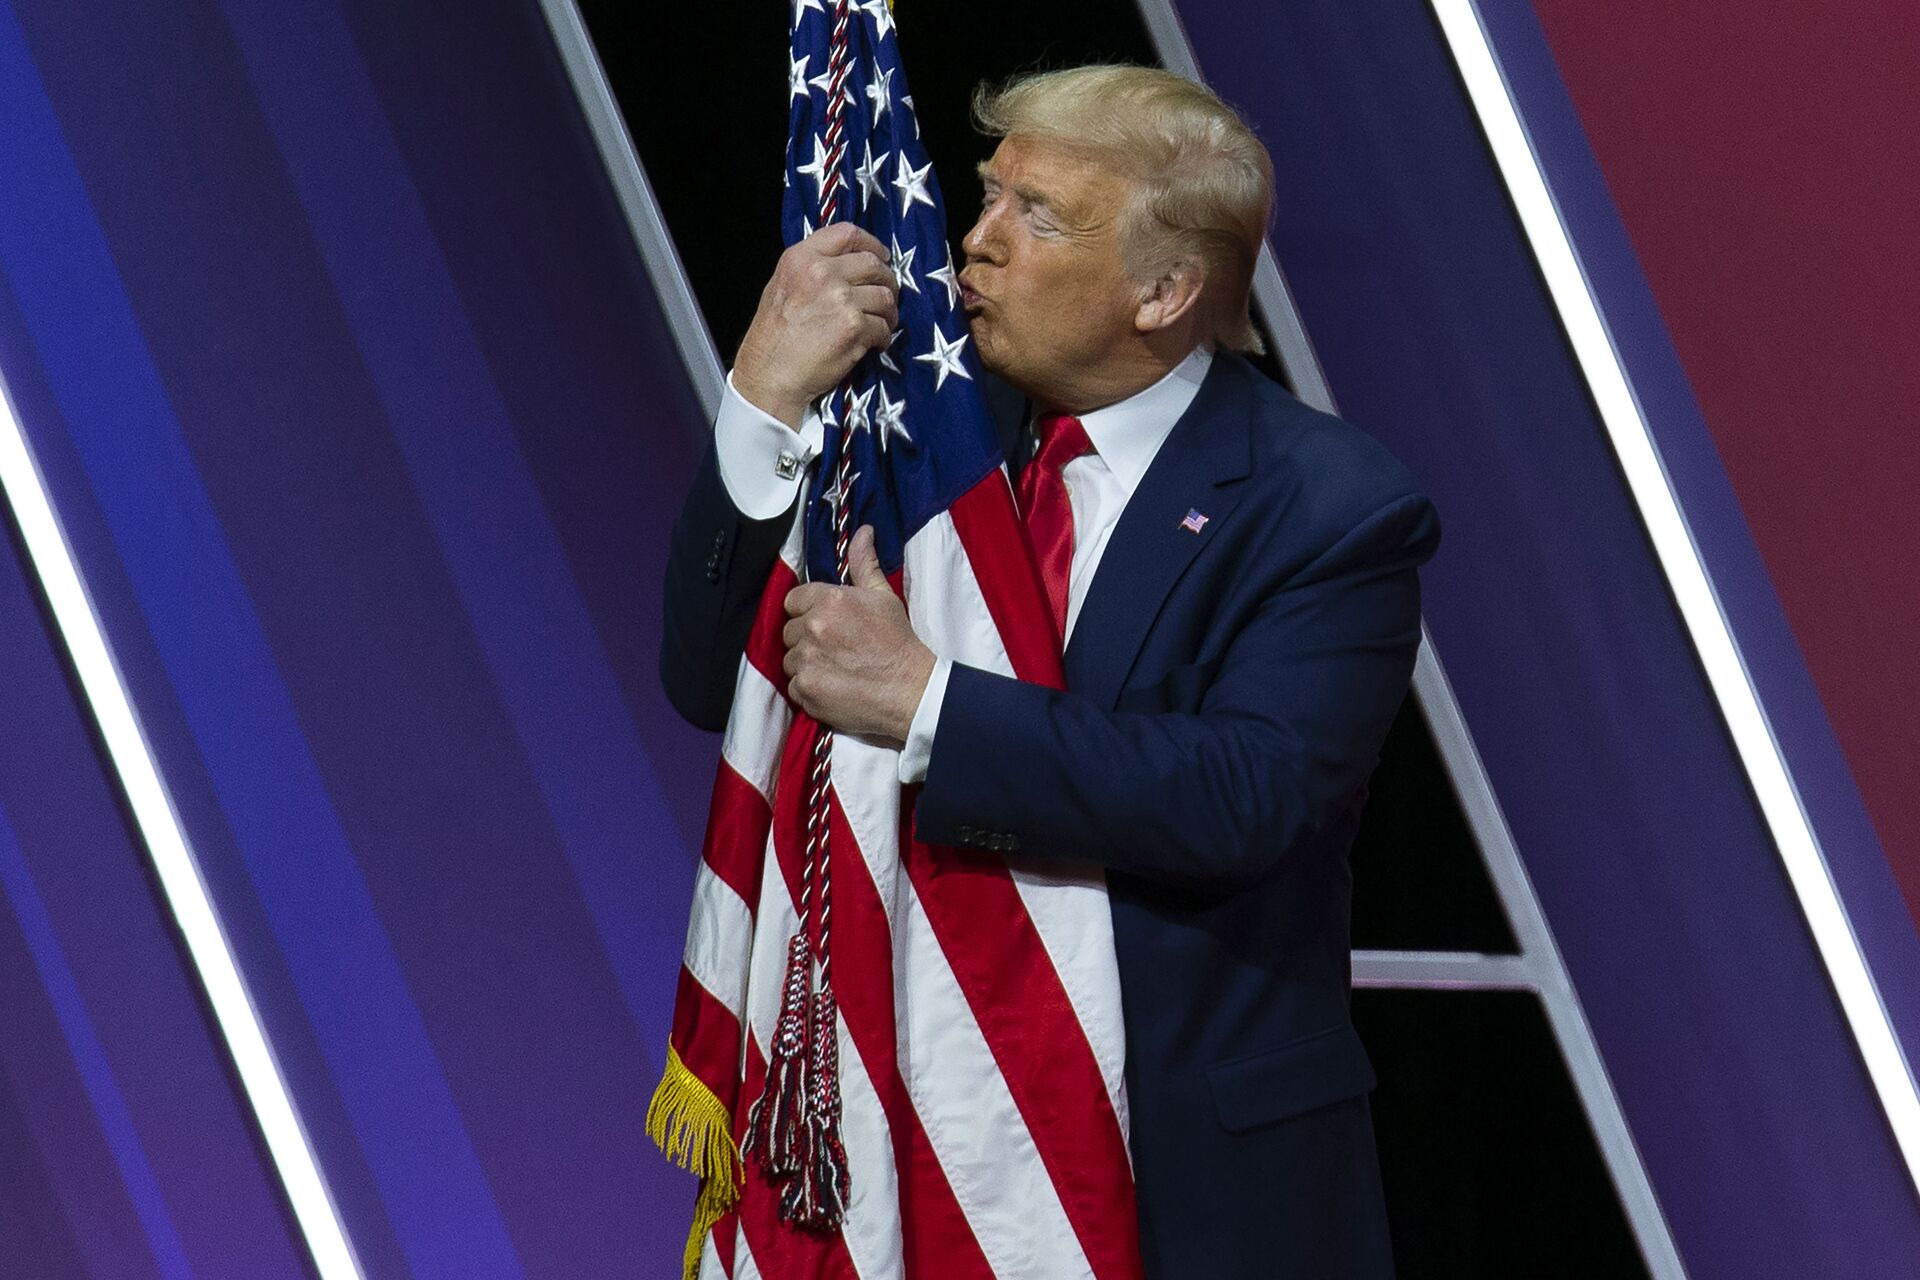 President Donald Trump kisses the American flag after speaking at Conservative Political Action Conference, CPAC 2020, at the National Harbor in Oxon Hill, Md., Saturday, Feb. 29, 2020. - Sputnik International, 1920, 07.09.2021